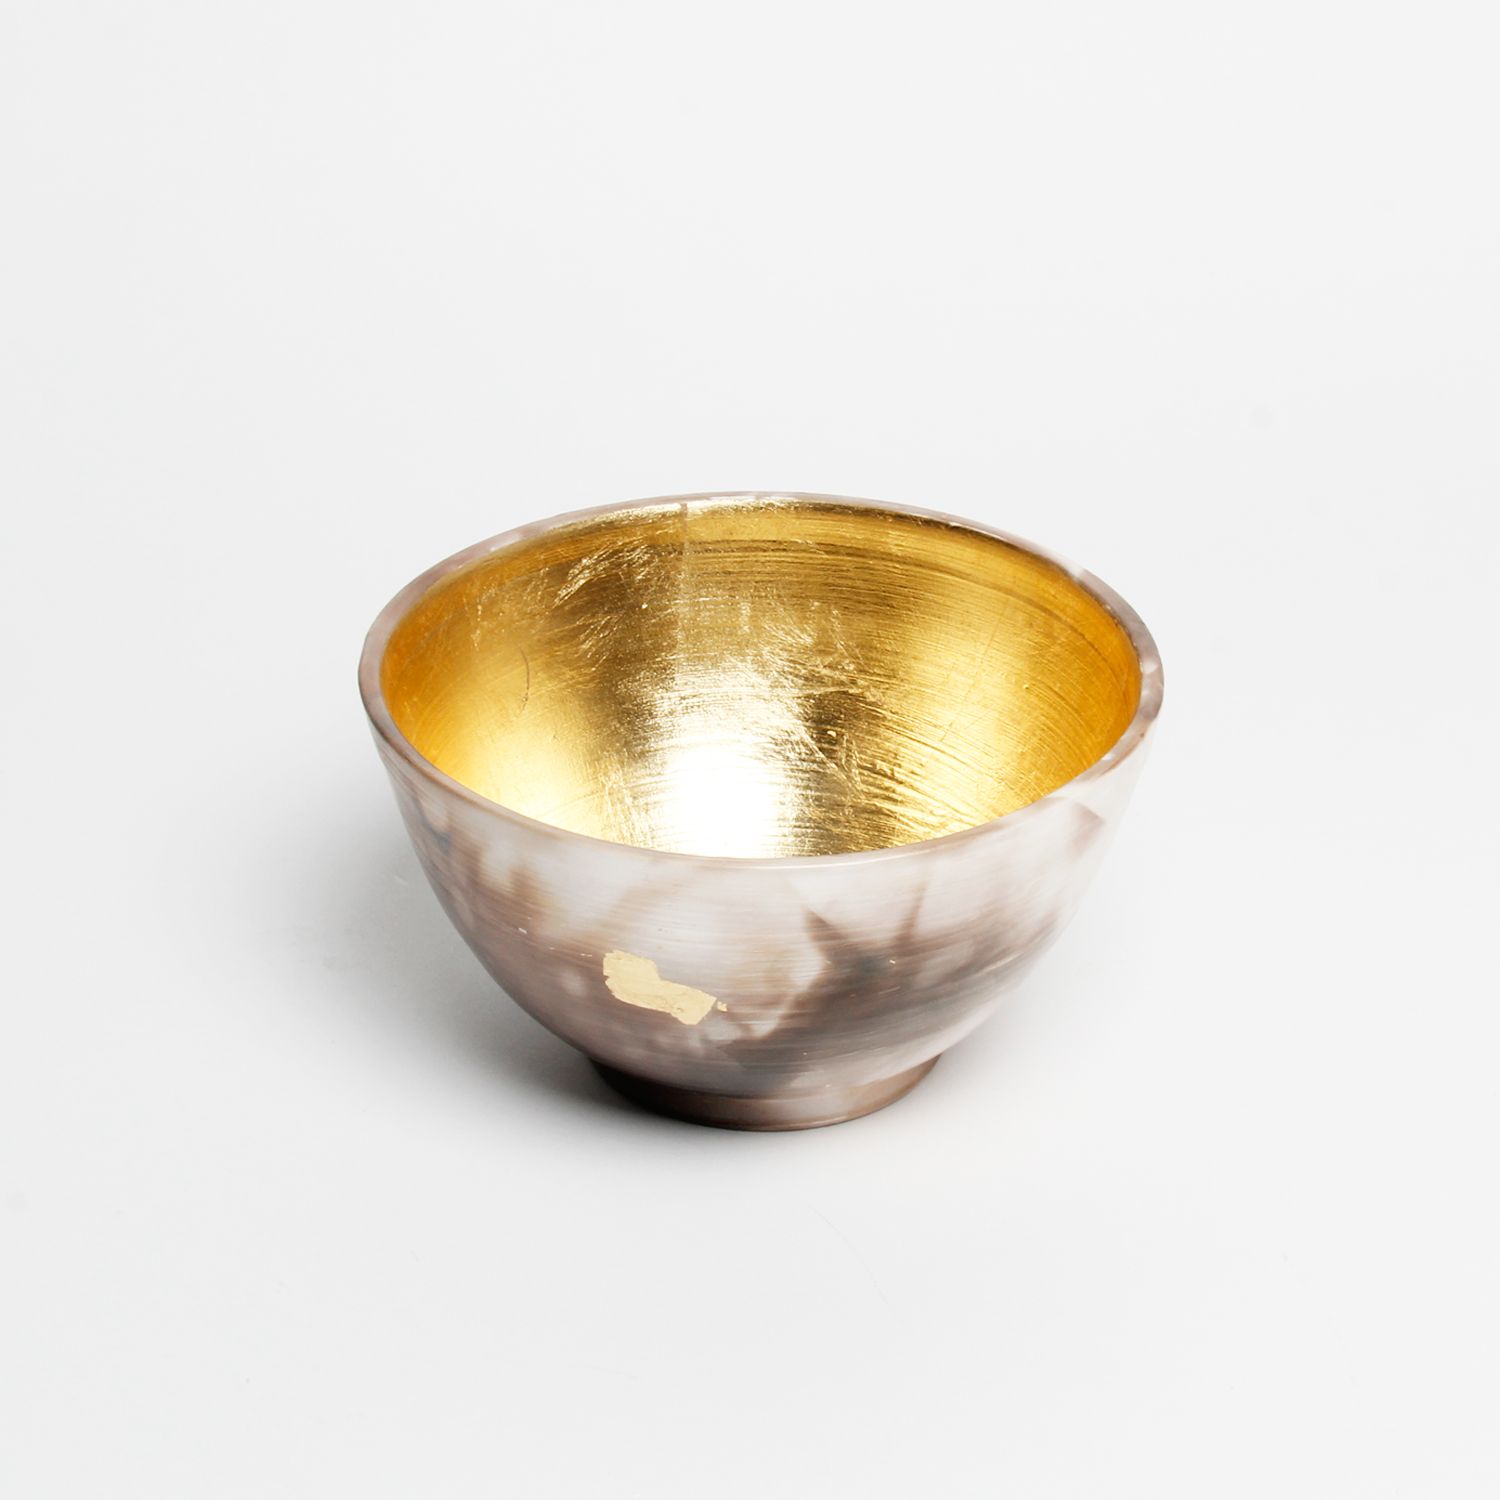 Susan Card: Smoke Fired Bowl (Each Sold Separately) Product Image 4 of 7